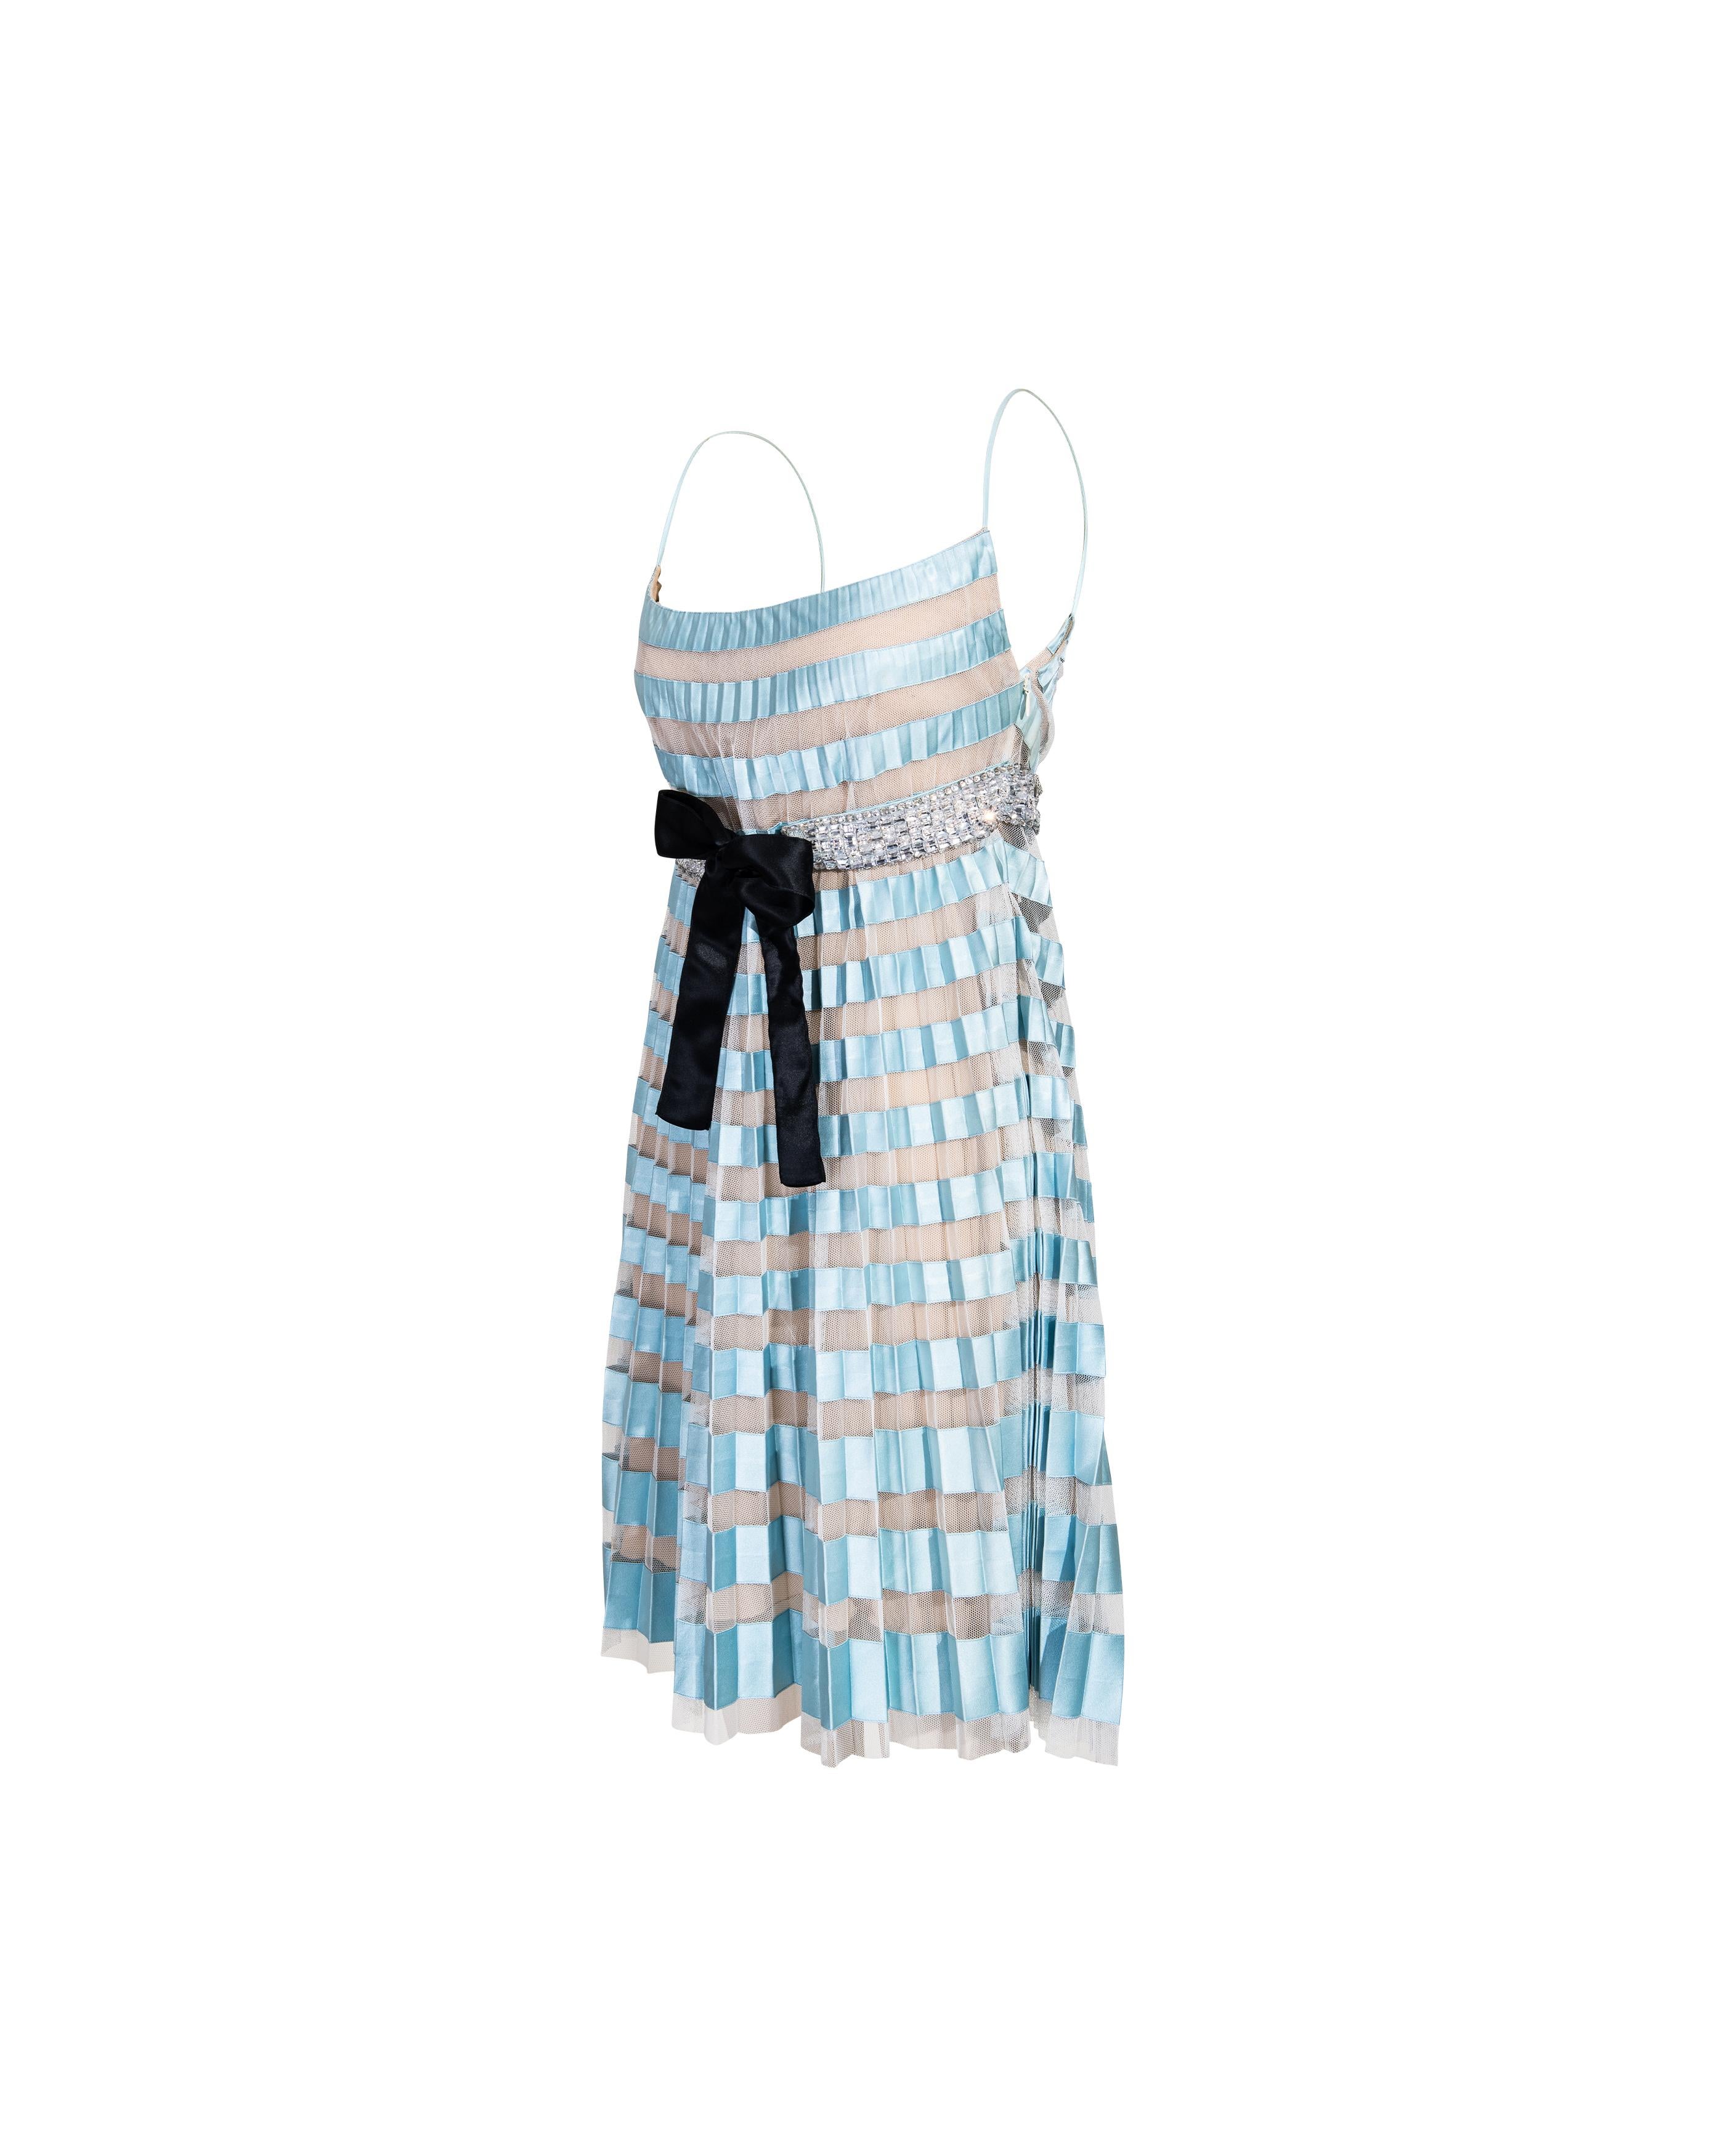 S/S 2007 Valentino Sky Blue Pleated Mini Dress In Good Condition In North Hollywood, CA